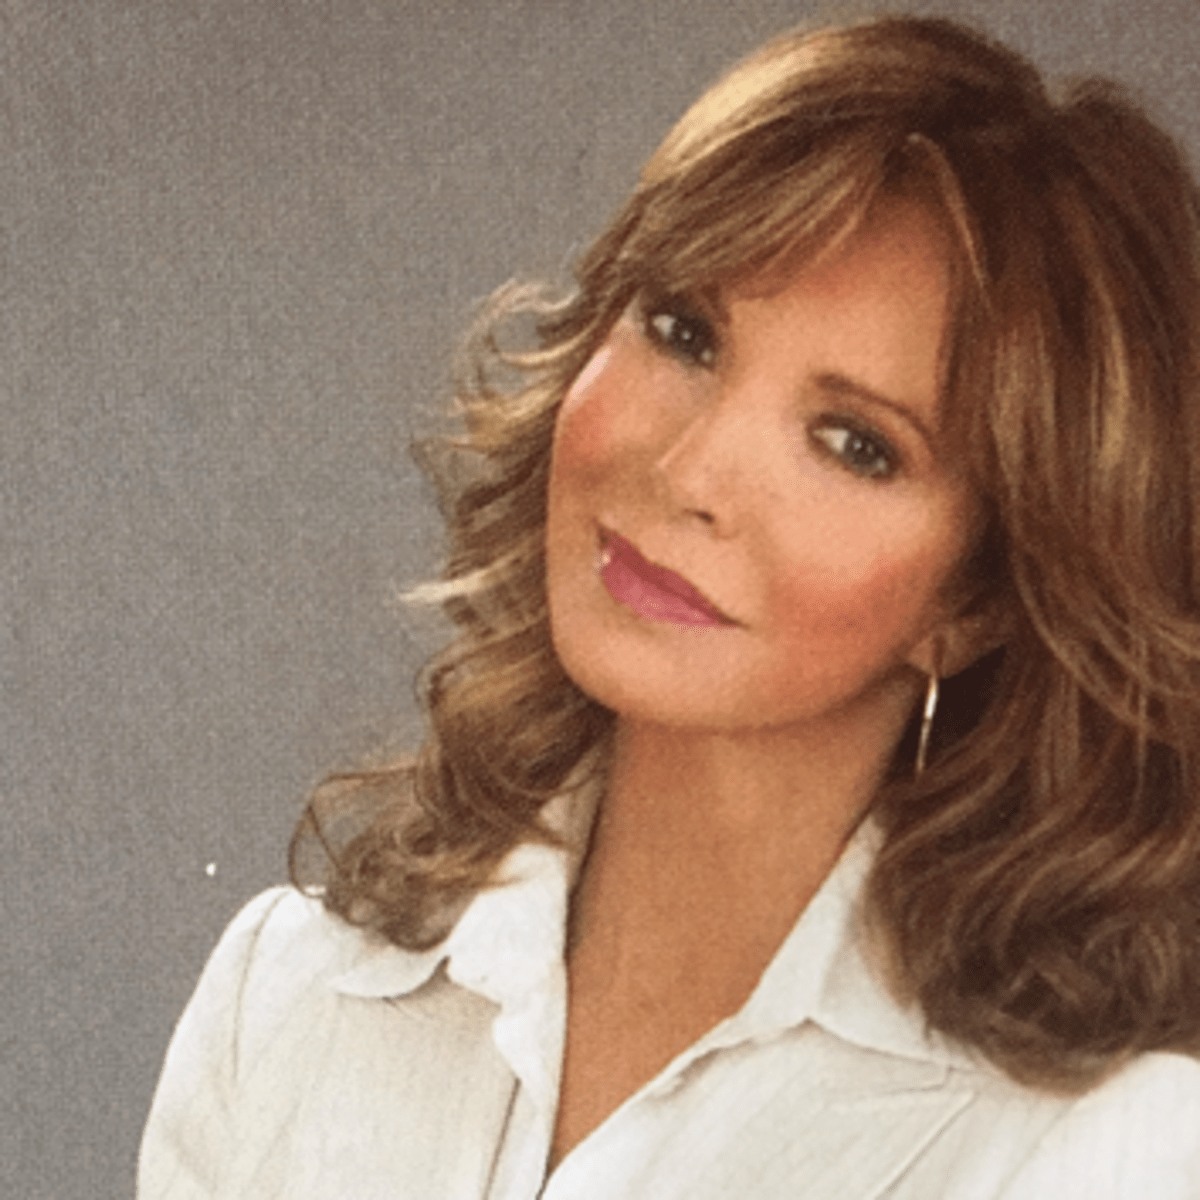 Smith pictures of jacqueline JACLYN SMITH